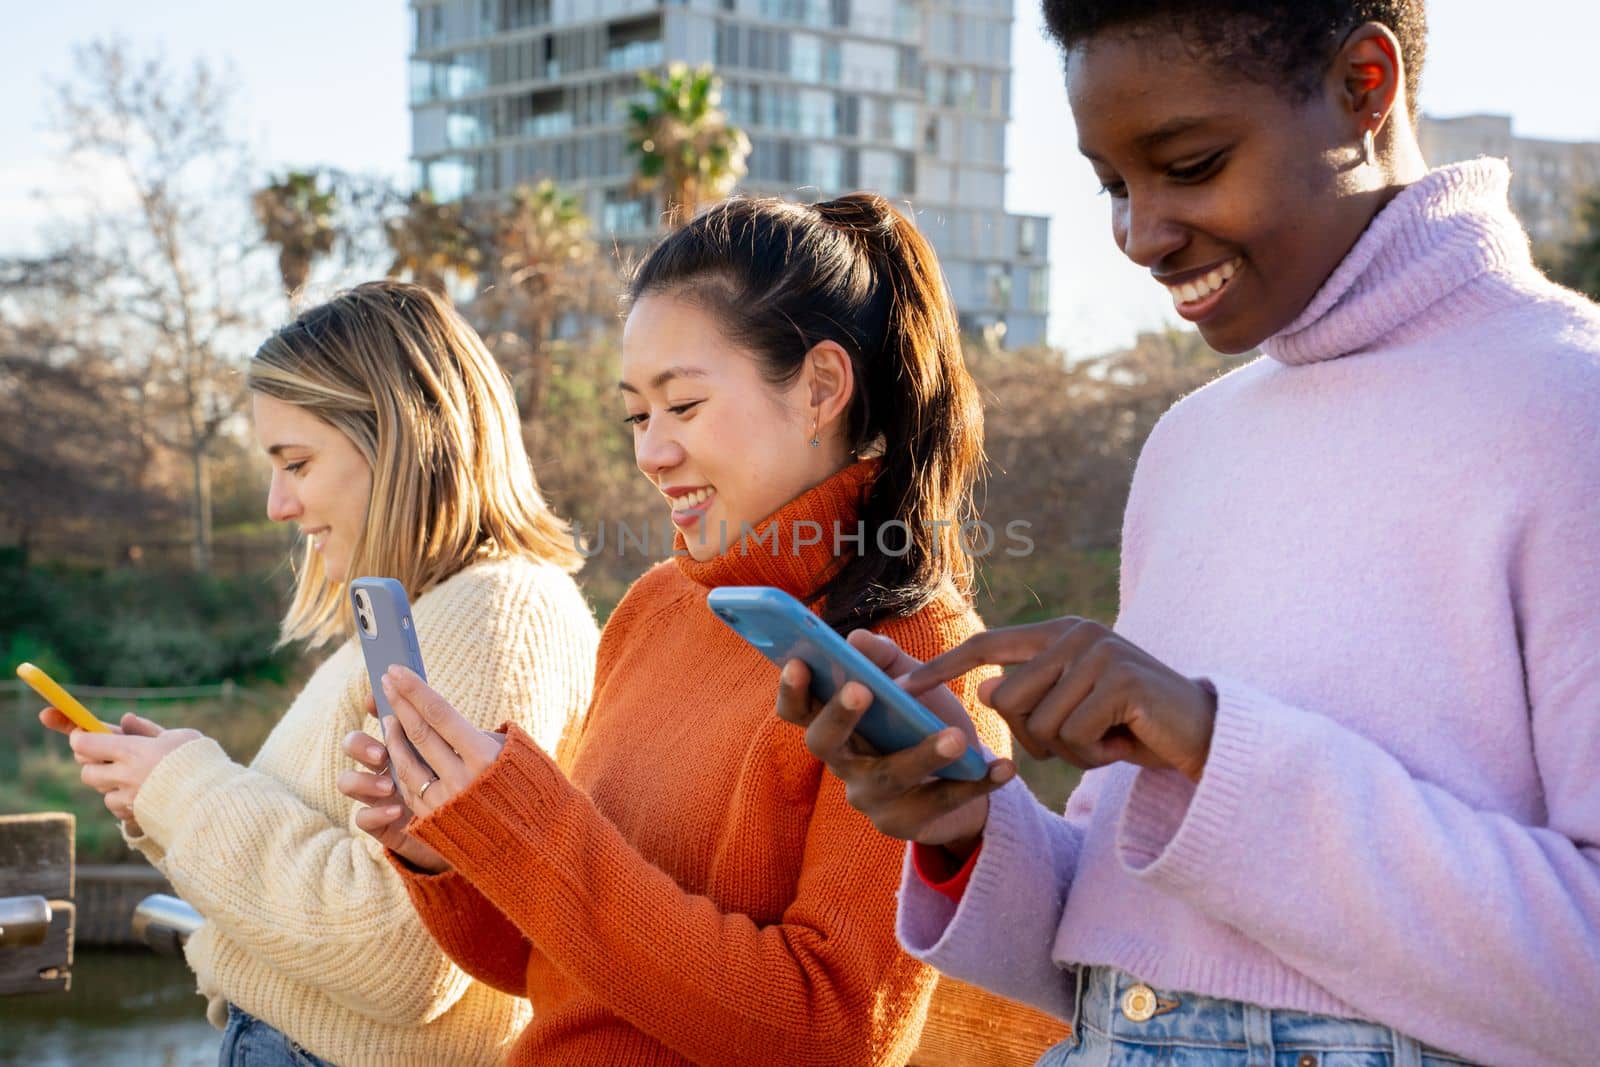 Cheerful female friends using cell phones and walking in the city. Technology addicted concept by PaulCarr